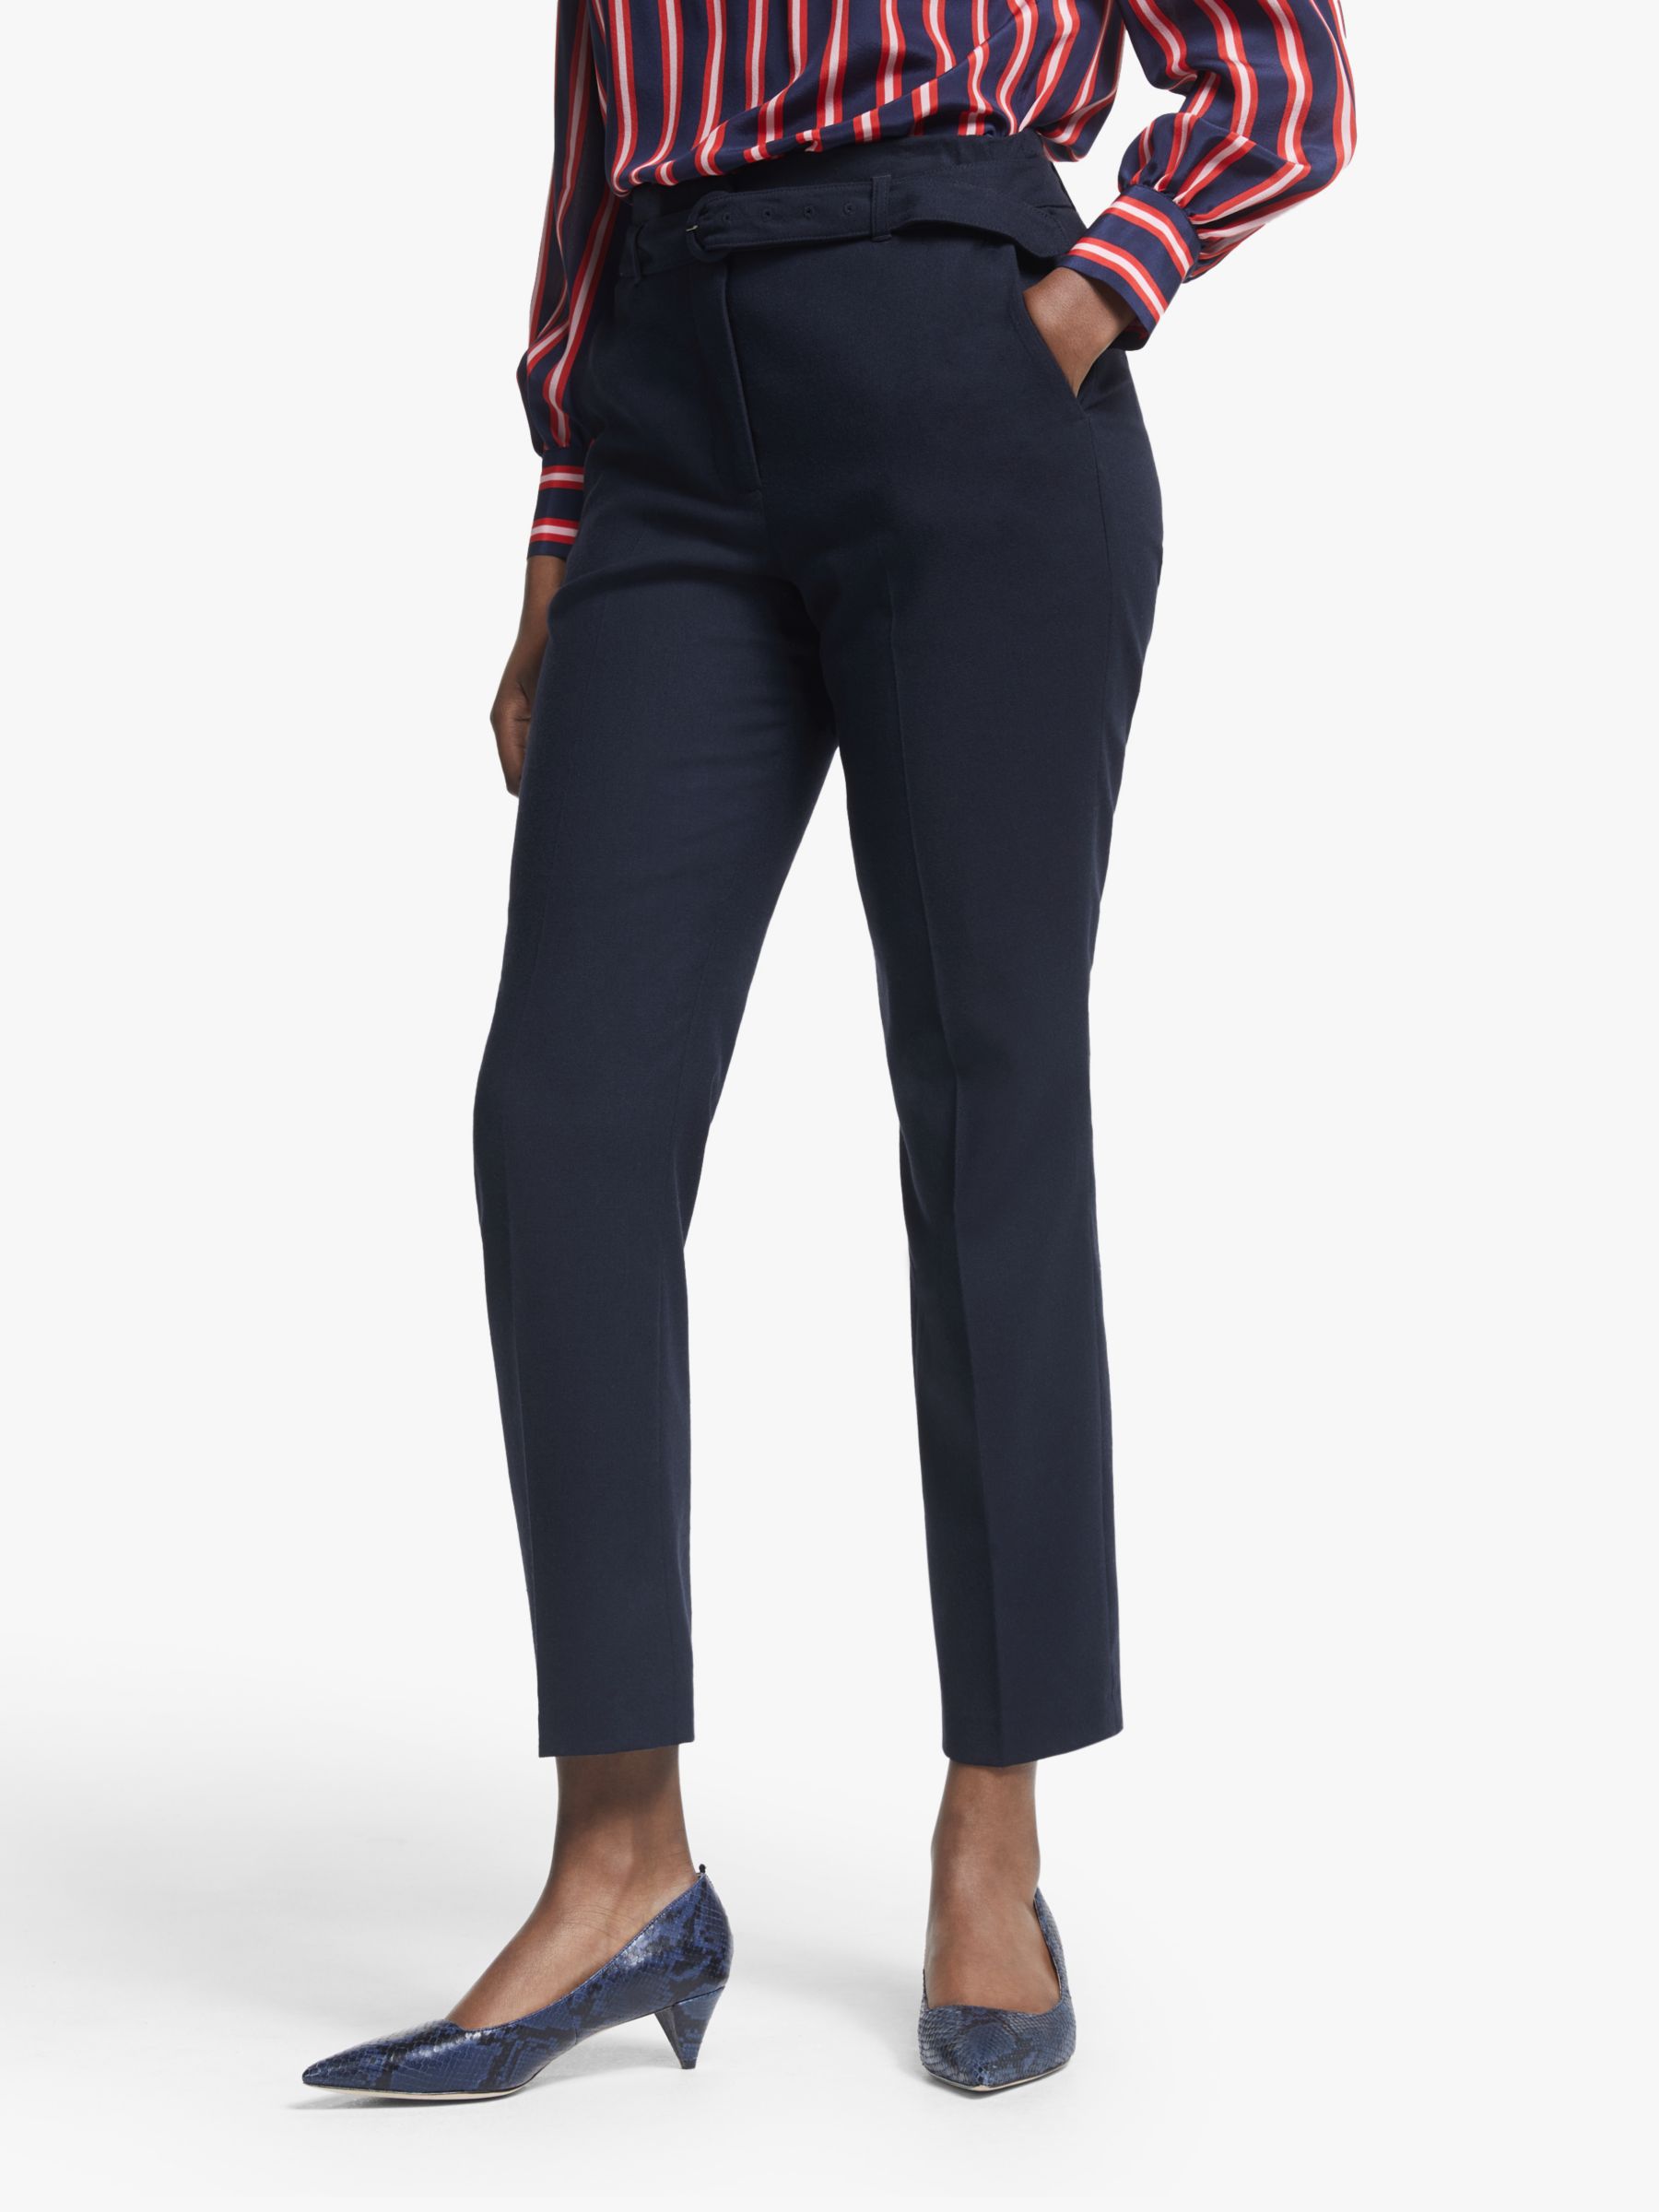 Boden Malden Tweed Belted Trousers, Navy